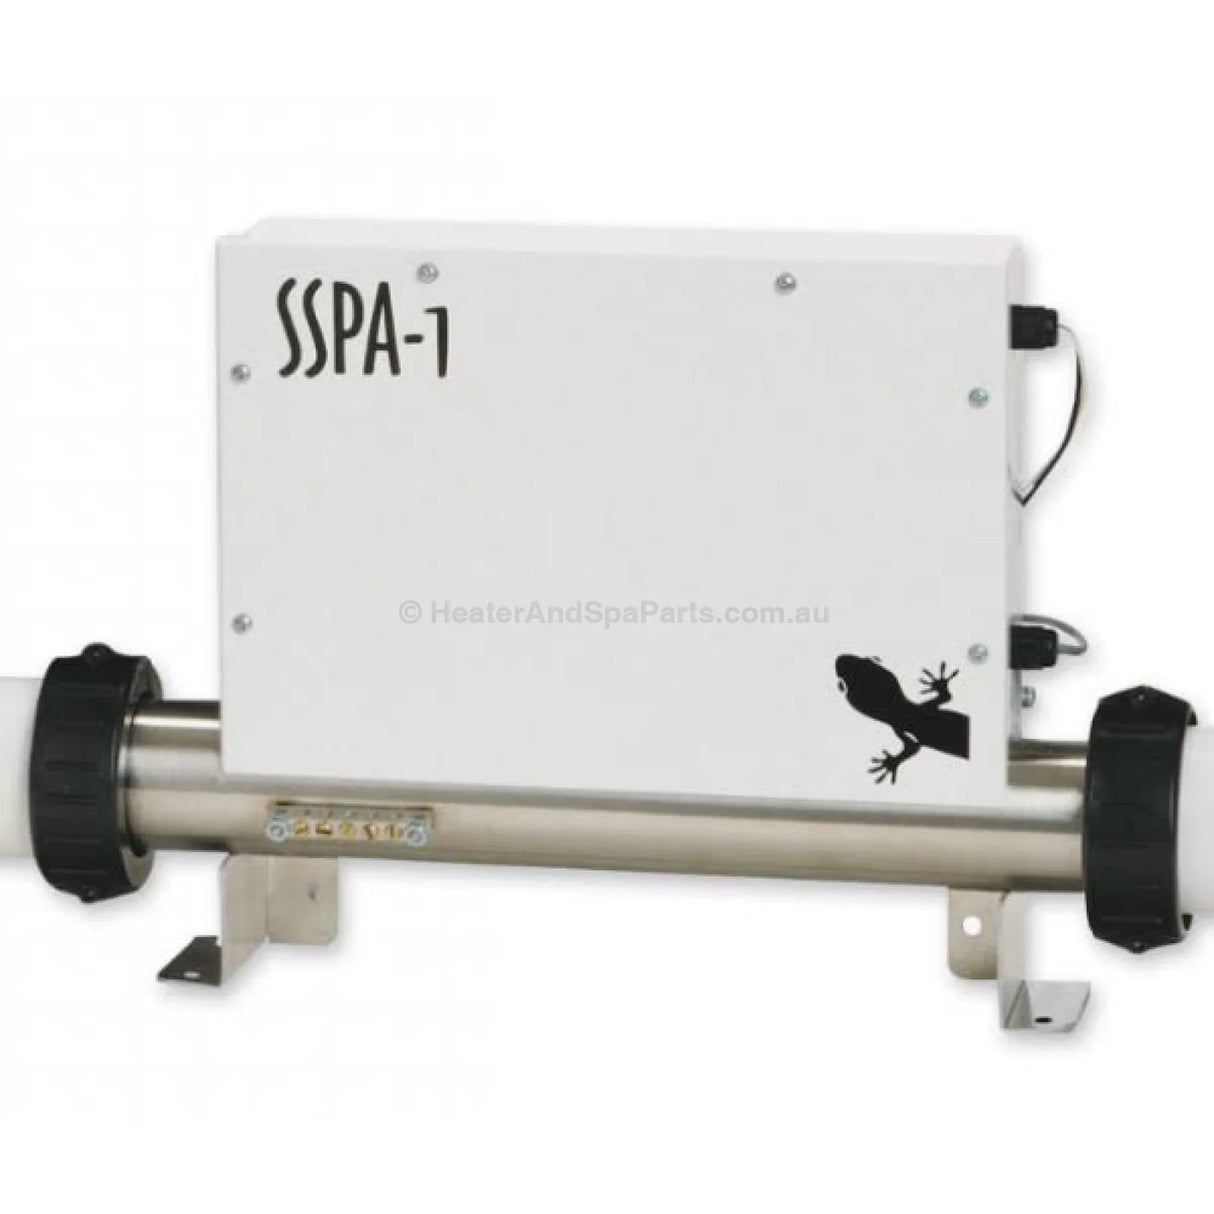 Gecko SSPA / MSPA Universal 15" / 380mm Heater Tube Assembly - 2.0kW 2.5kW 3.6kW - Heater and Spa Parts